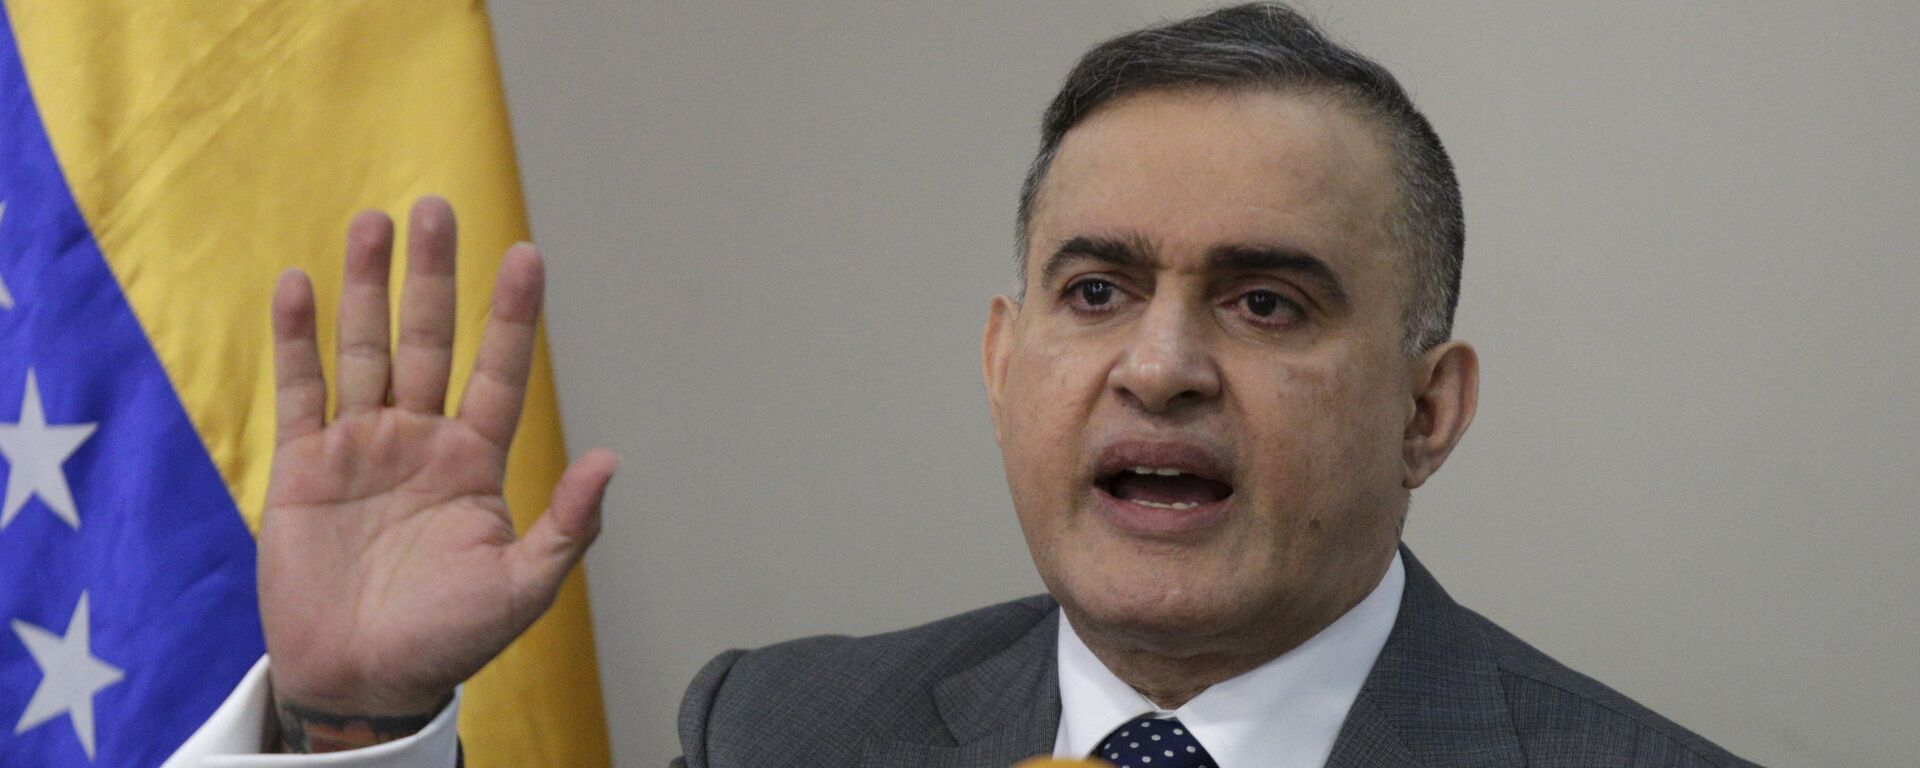 Venezuela's state ombudsman Tarek William Saab gestures as he talks to the media during a news conference in Caracas, March 9, 2016. - Sputnik Mundo, 1920, 26.03.2021